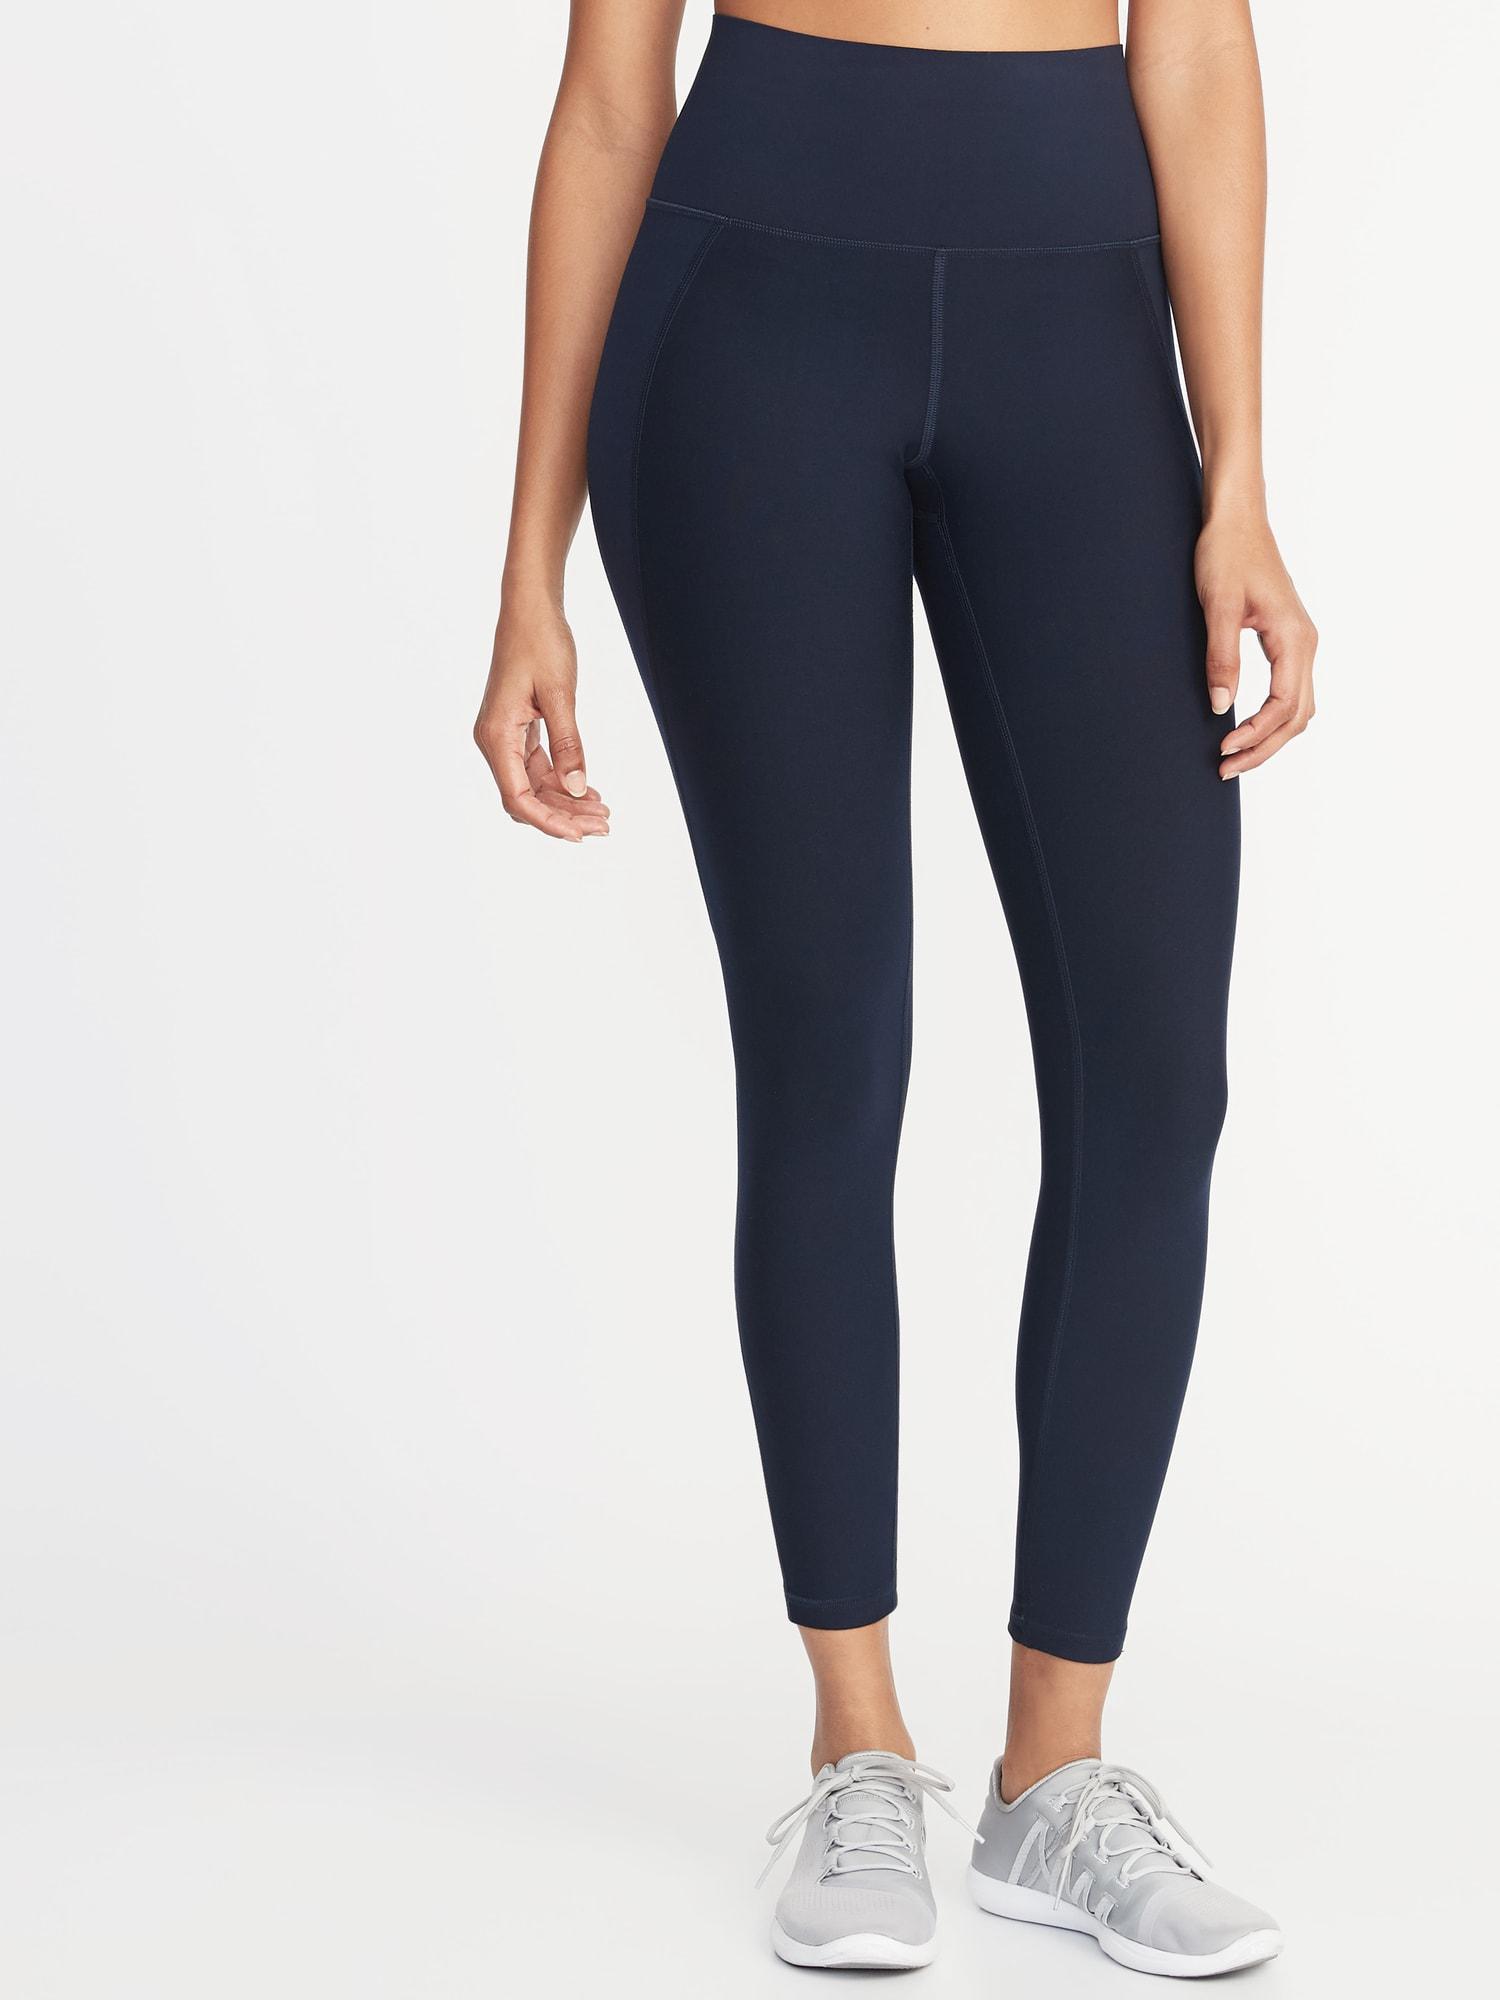 Mid-Rise Elevate 7/8-Length Mesh-Panel Compression Leggings for Women